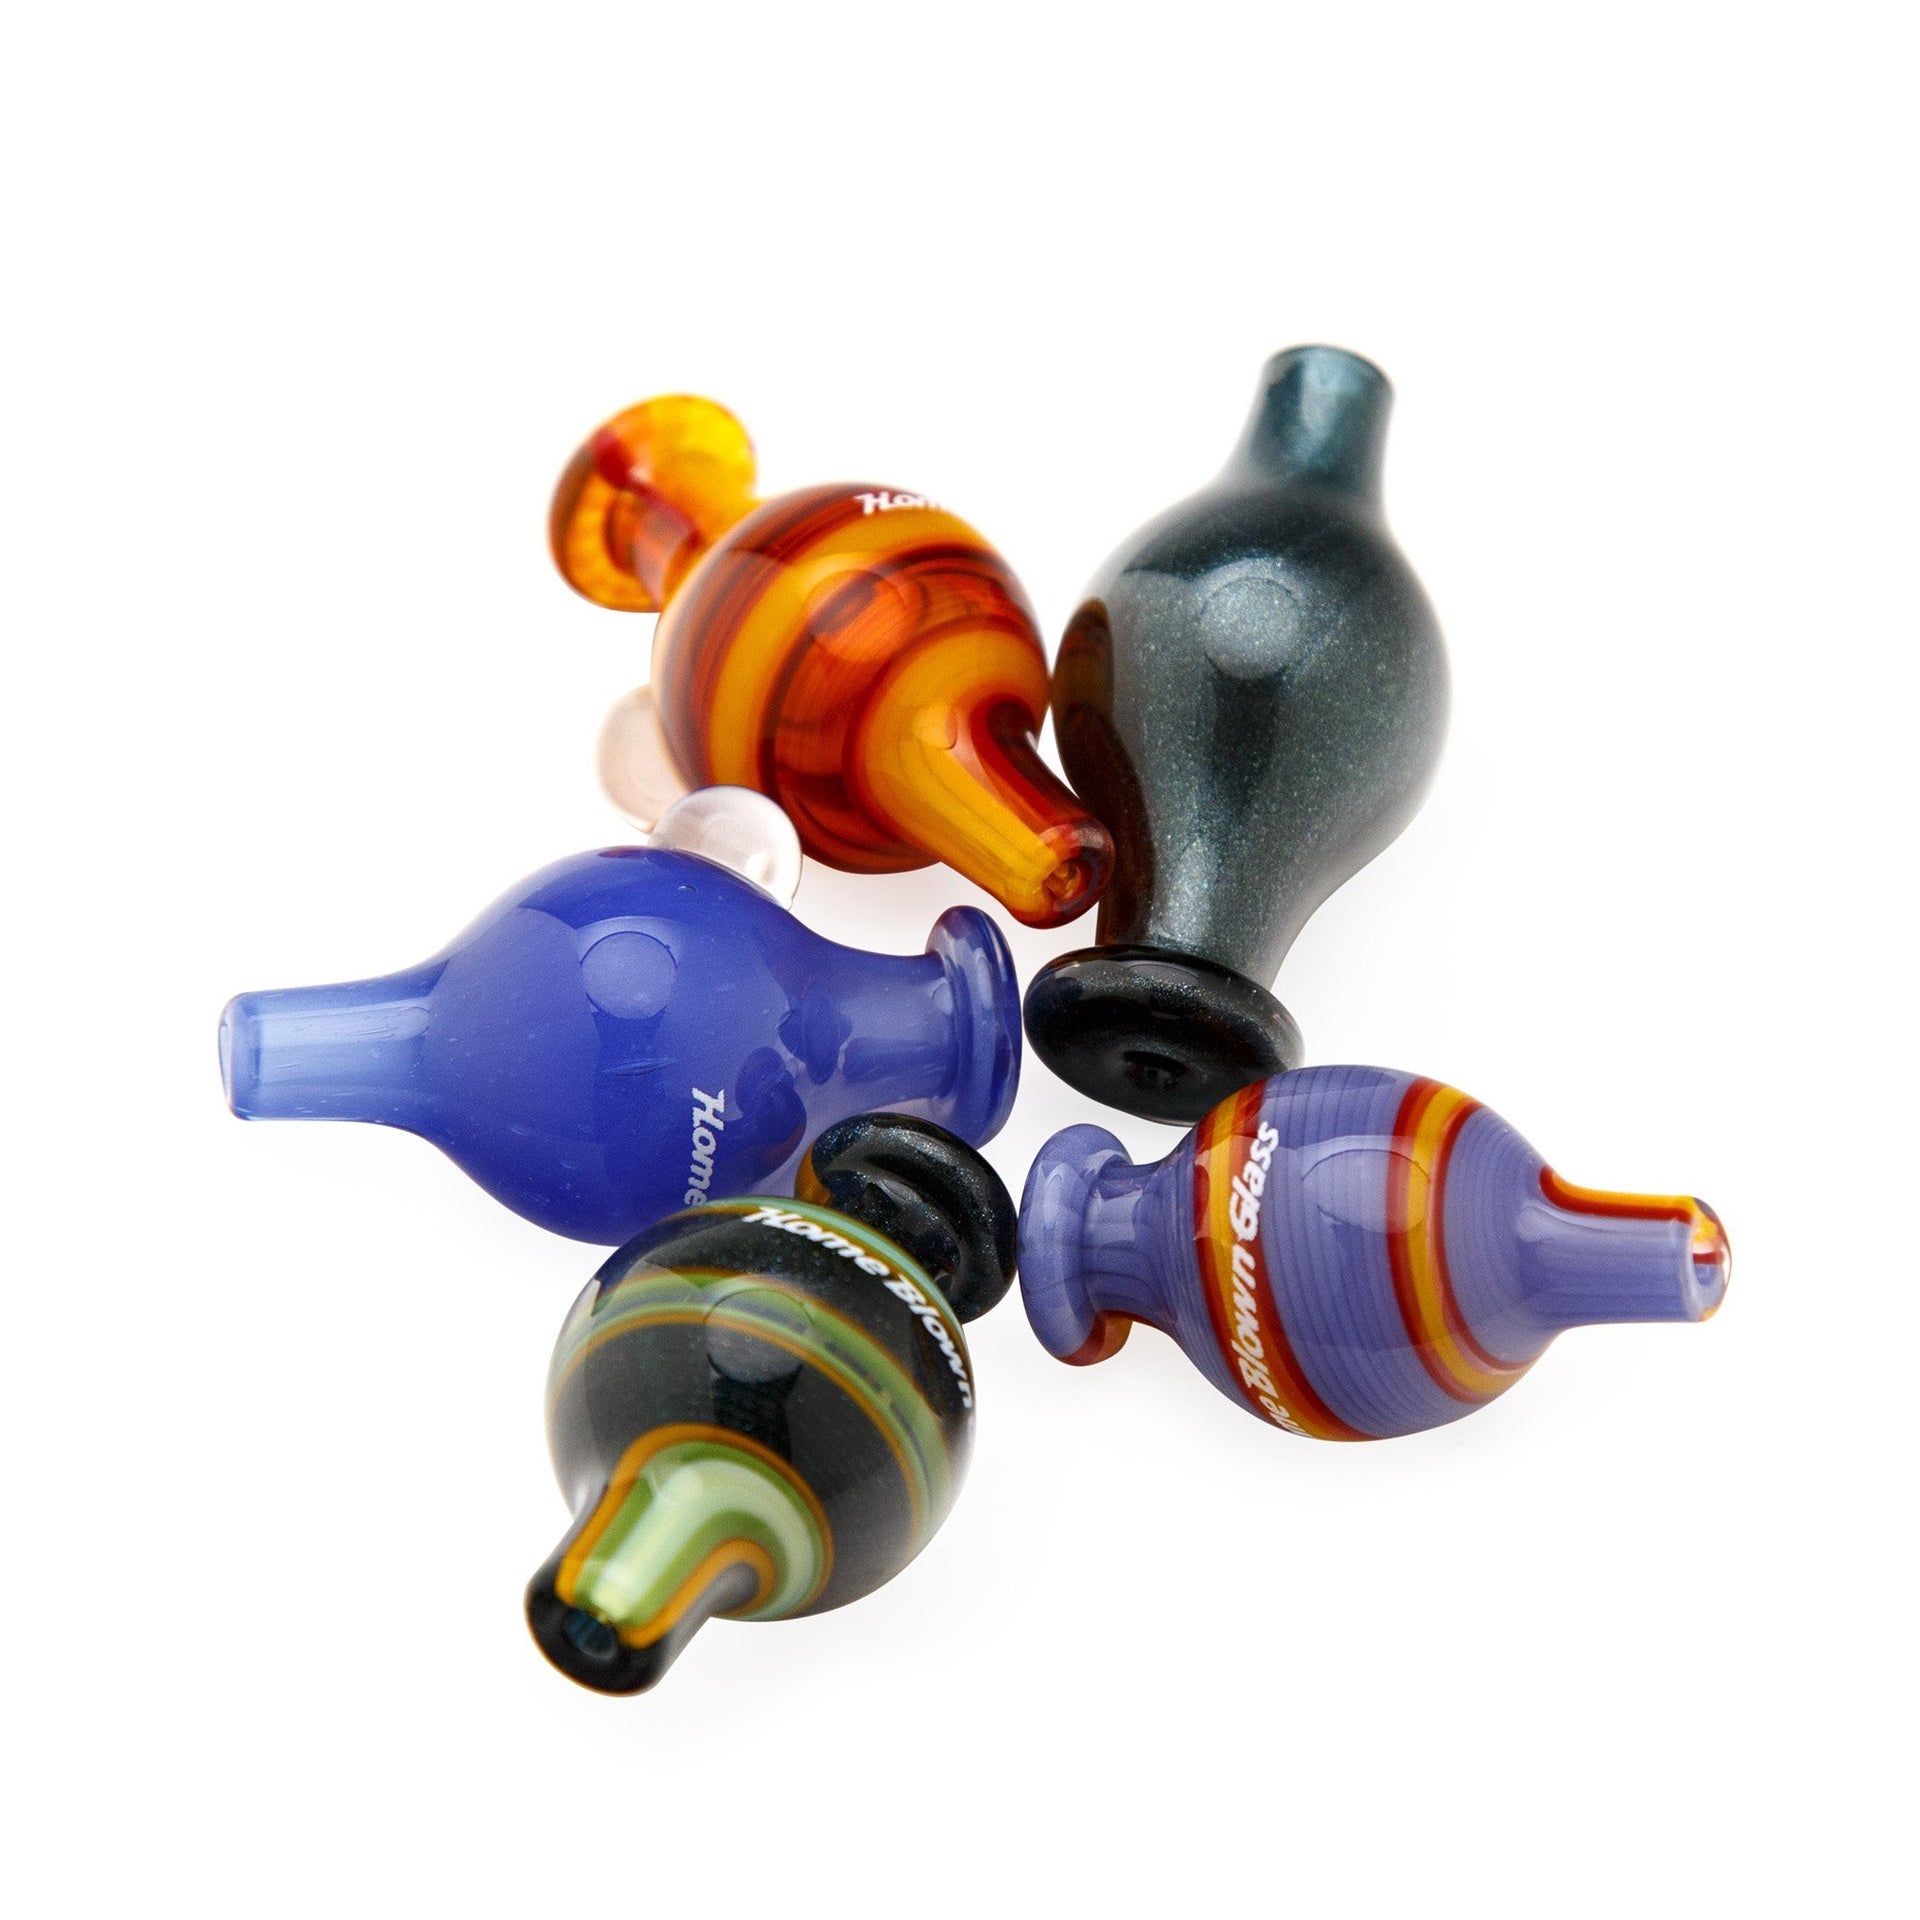 Home Blown Glass Bubble Carb Cap - Indigo - 420 Science - The most trusted online smoke shop.